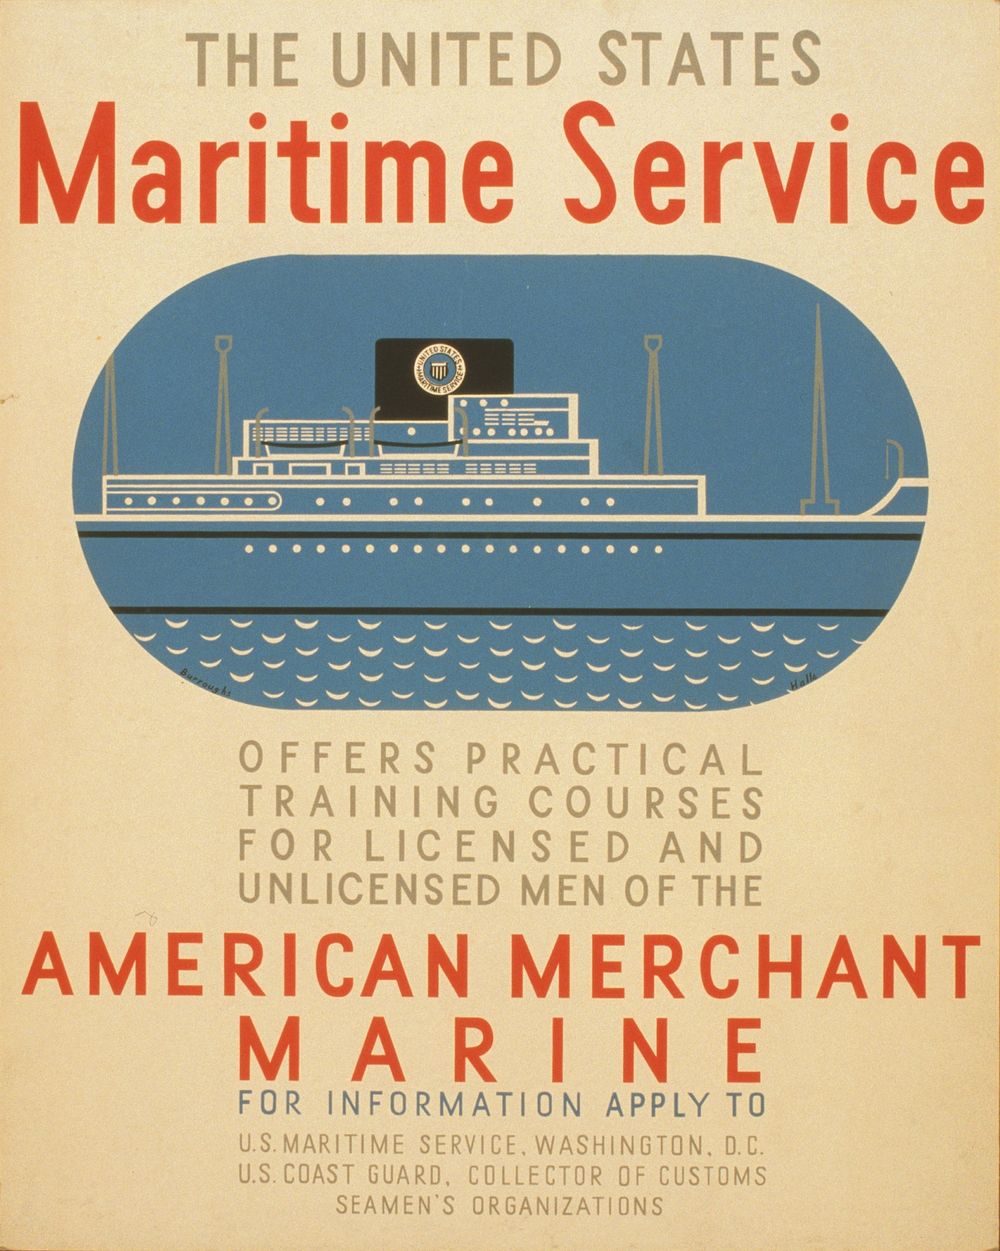 The United States Maritime Service offers practical training courses for licensed and unlicensed men of the American…